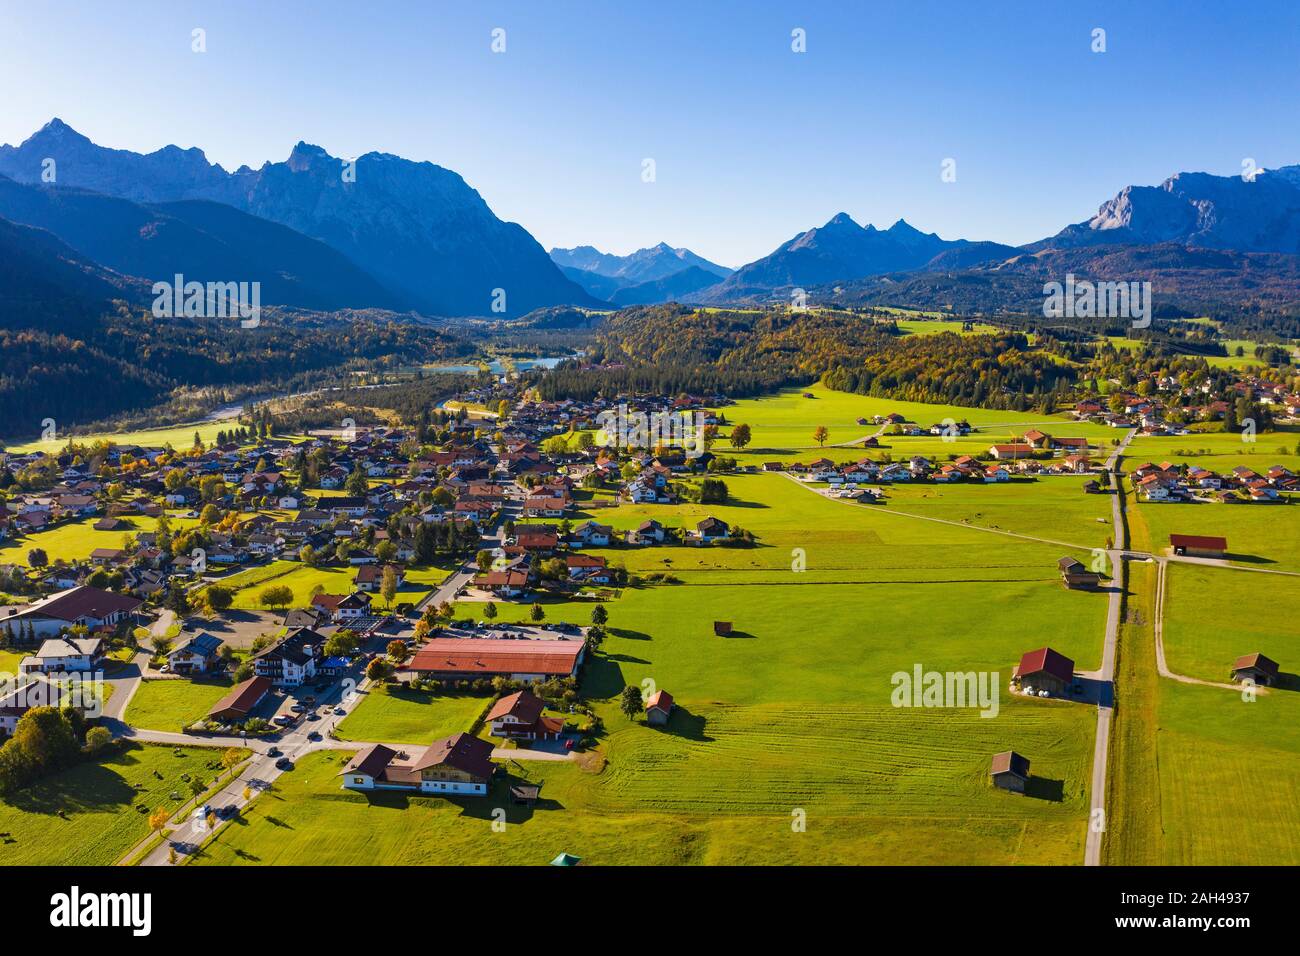 Germany, Bavaria, Upper Bavaria, Werdenfelser Land, Krun, Aerial view of fields and village with Karwendel Mountains and Wetterstein Mountains in background Stock Photo